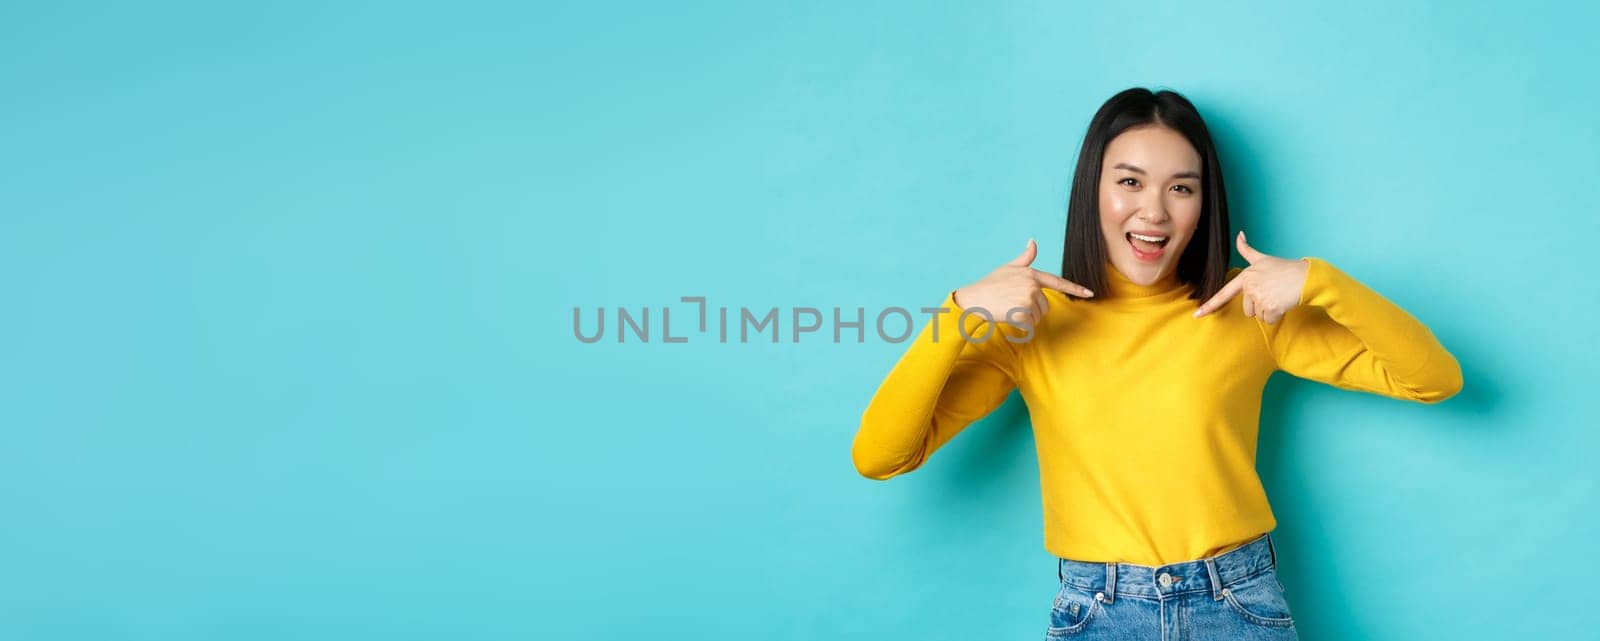 Beauty and fashion concept. Confident and sassy asian woman pointing at herself, smiling cheeky at camera, being professional, standing over blue background.